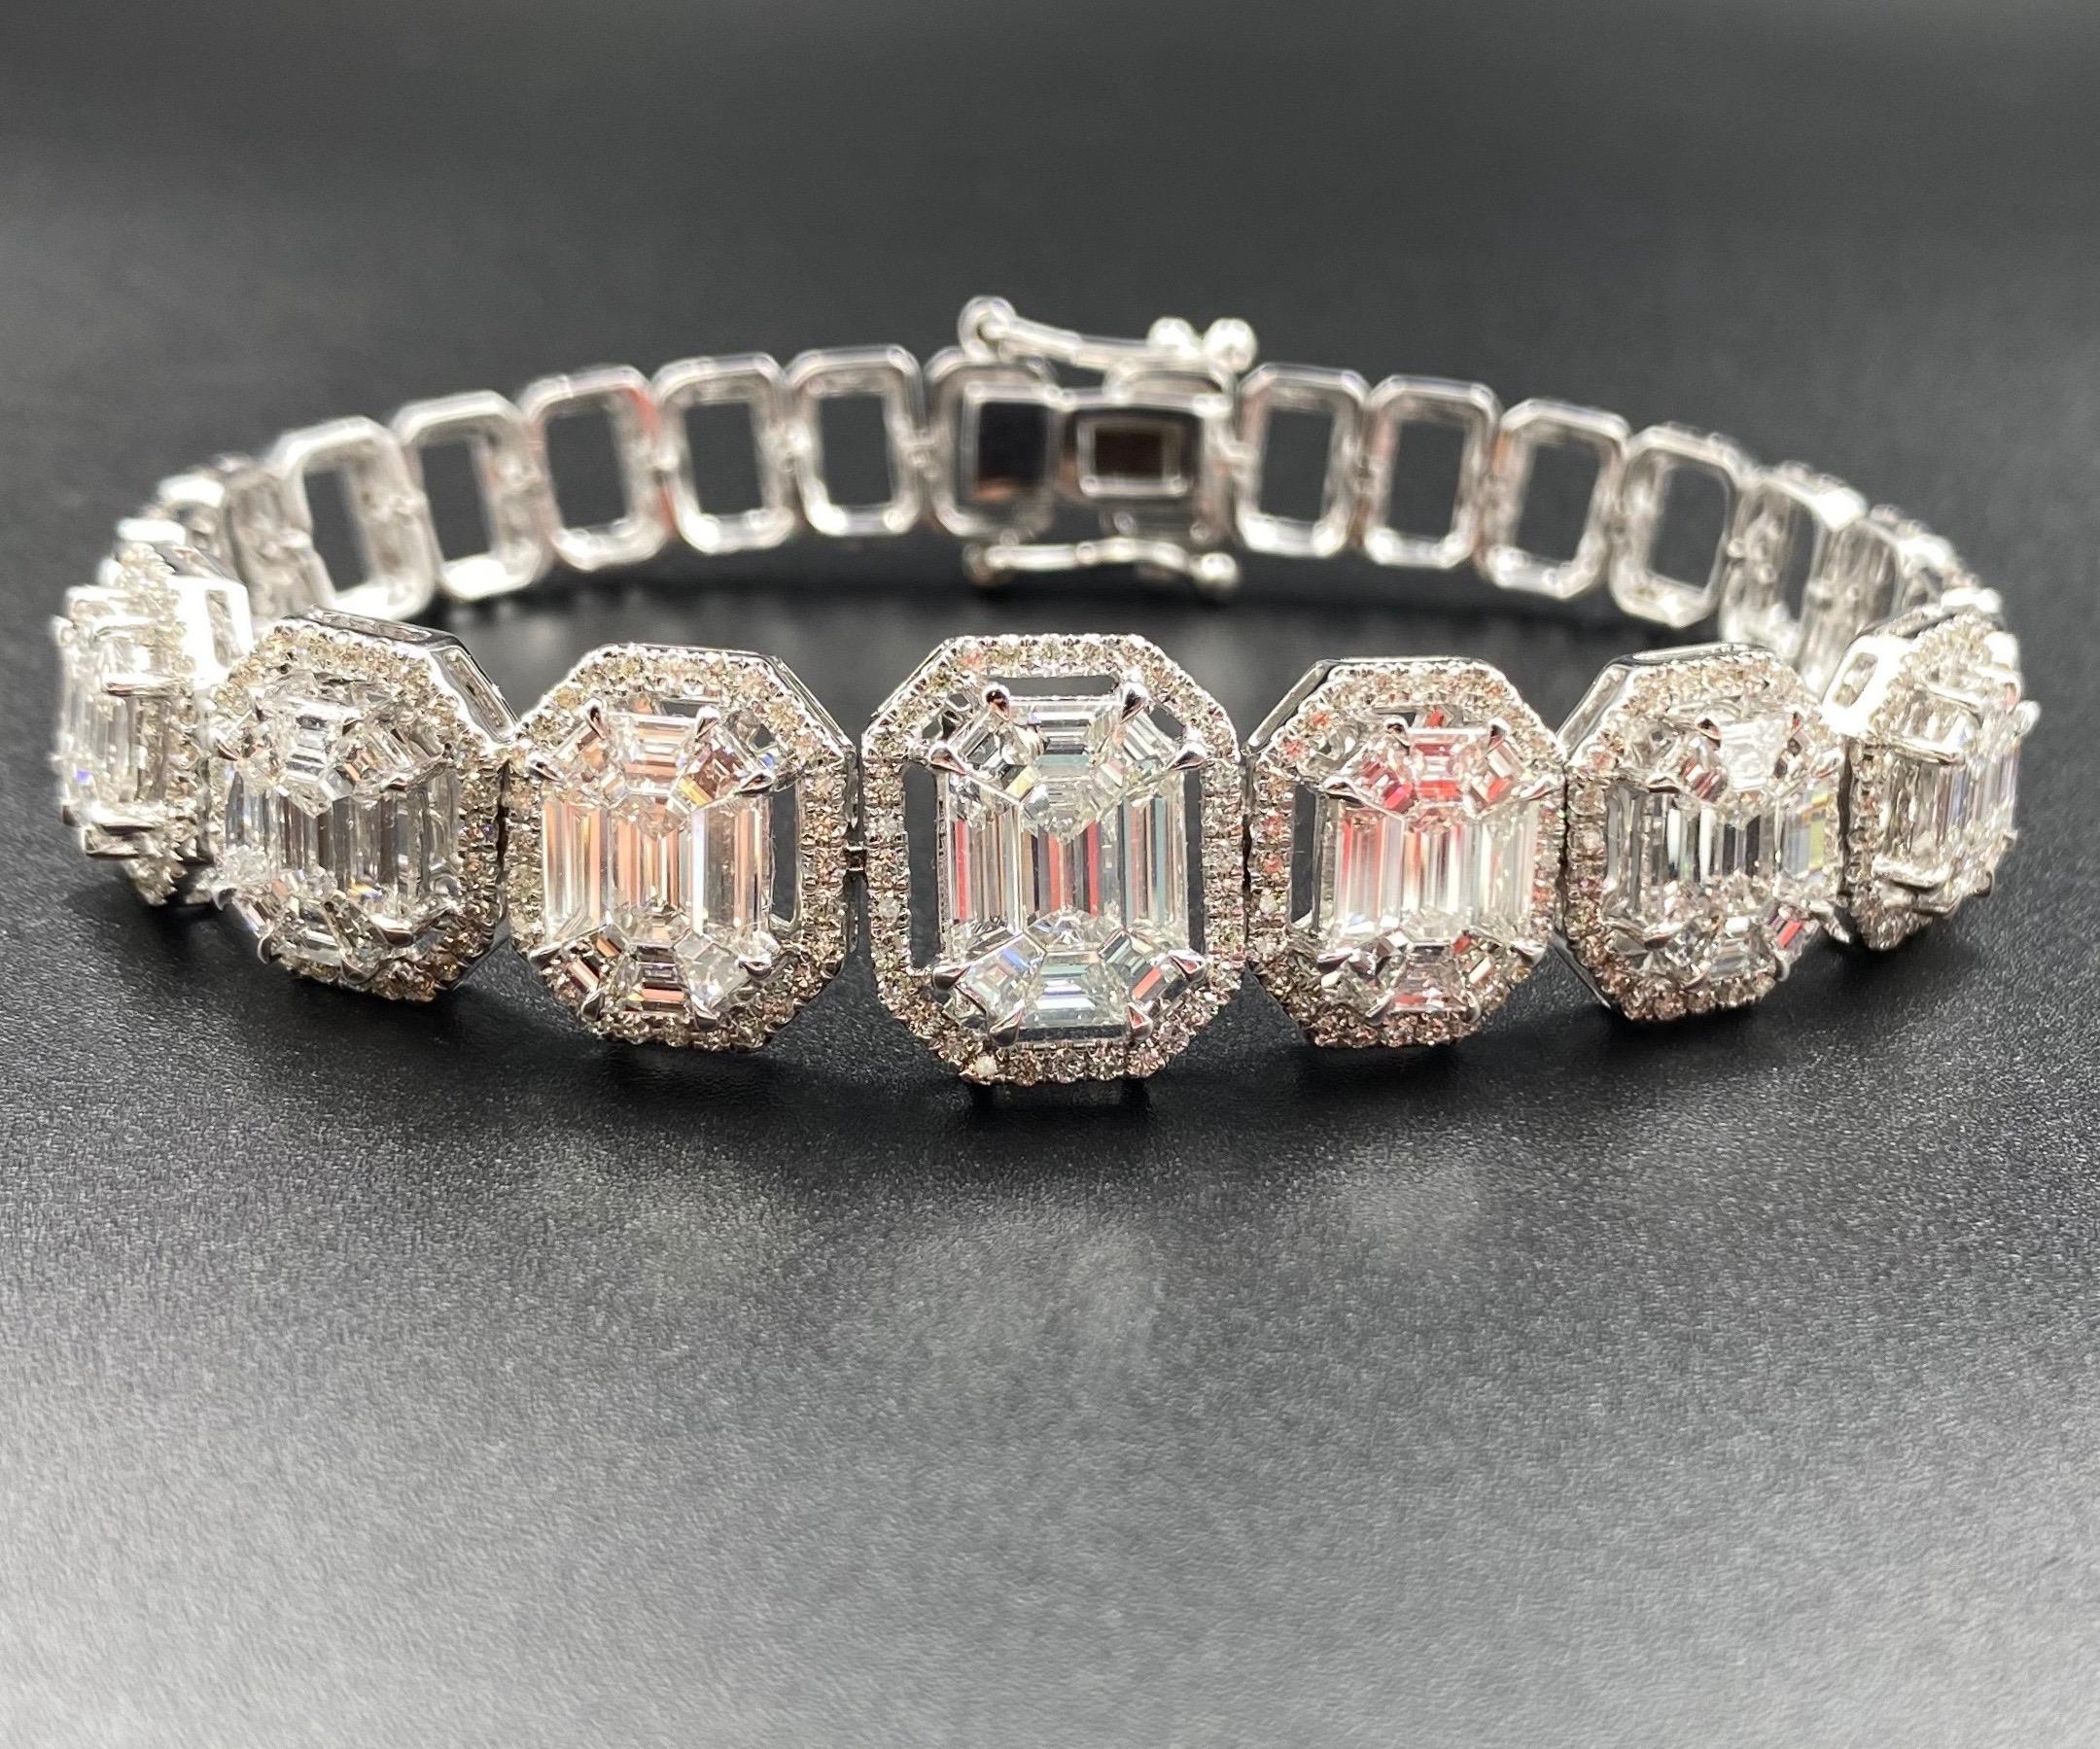 A timeless bracelet, the Emaya Bracelet Features 4.5carats for diamonds, and is made in 18K white gold.

Diamond Details
Shape	Round Brilliant and Pi Cut 
Color	G 
Clarity 	VS1
Weight 	4.5  carats 
 

Bracelet Details
Width 	 
Metal 	18K white